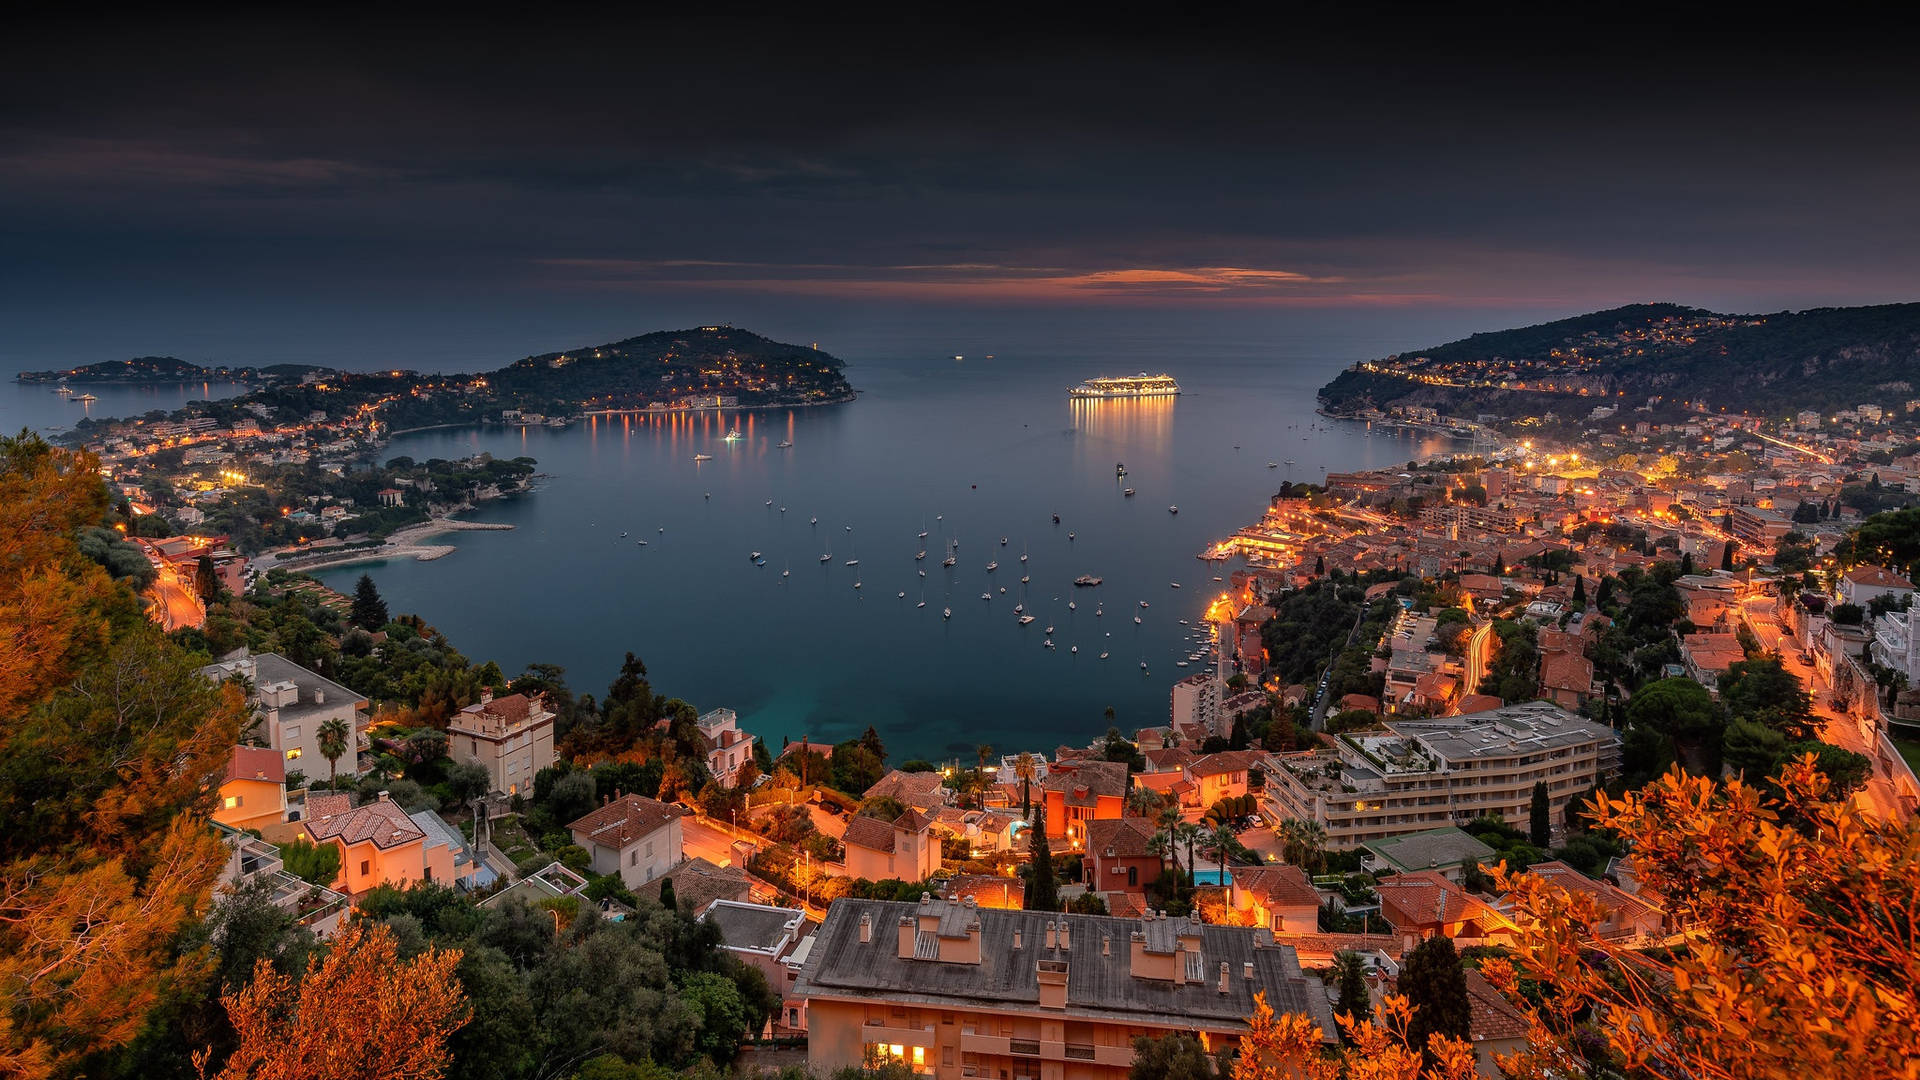 Villefranche France At Night Background